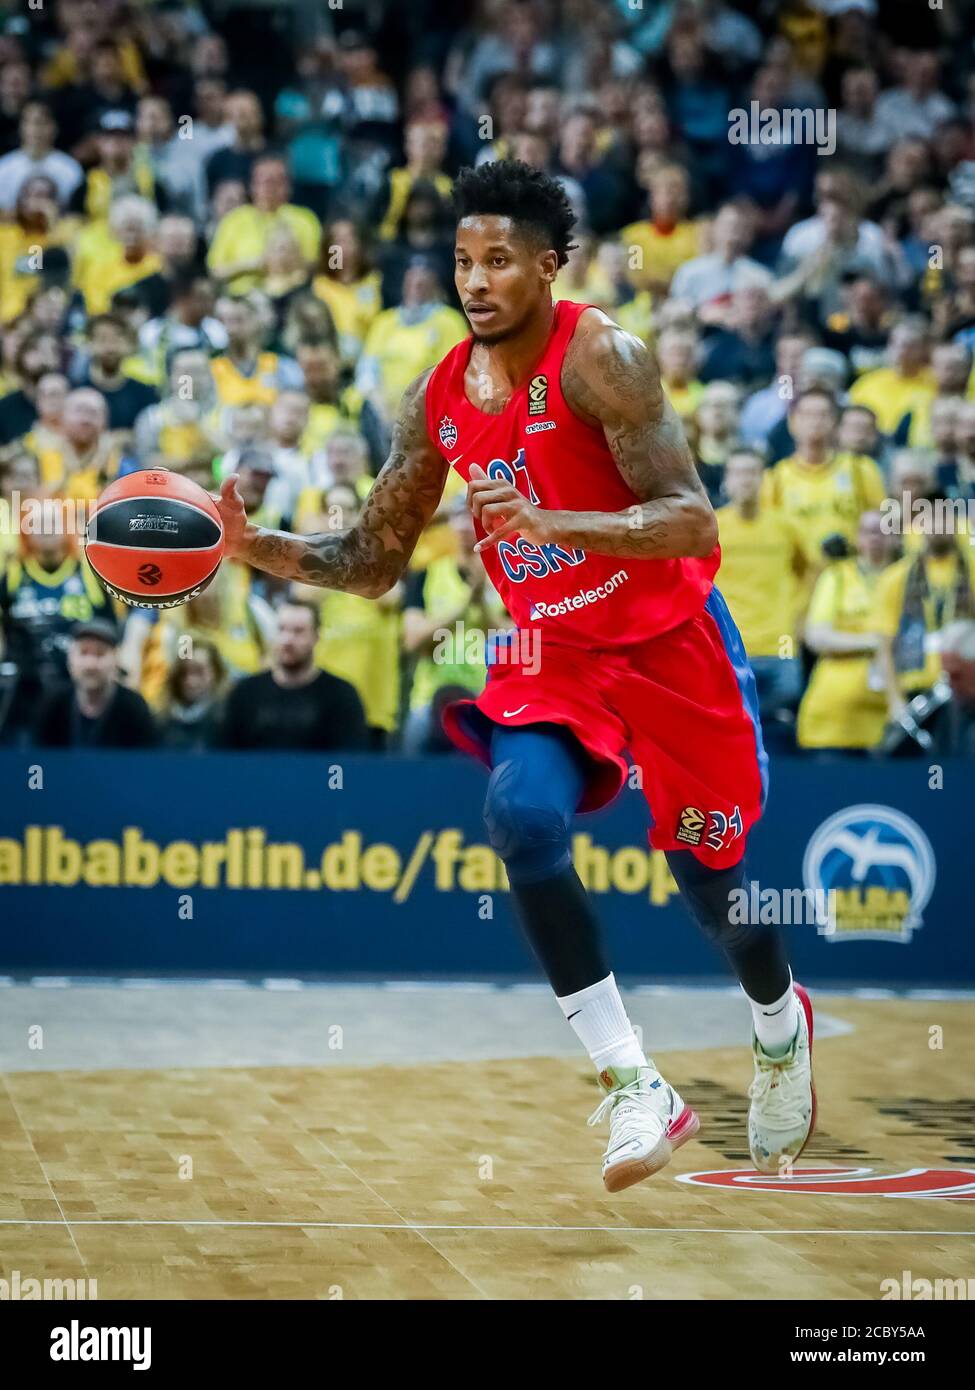 Berlin, Germany, October 25, 2019: basketball player Will Clyburn in action during the EuroLeague basketball match between Alba Berlin and CSKA Stock Photo